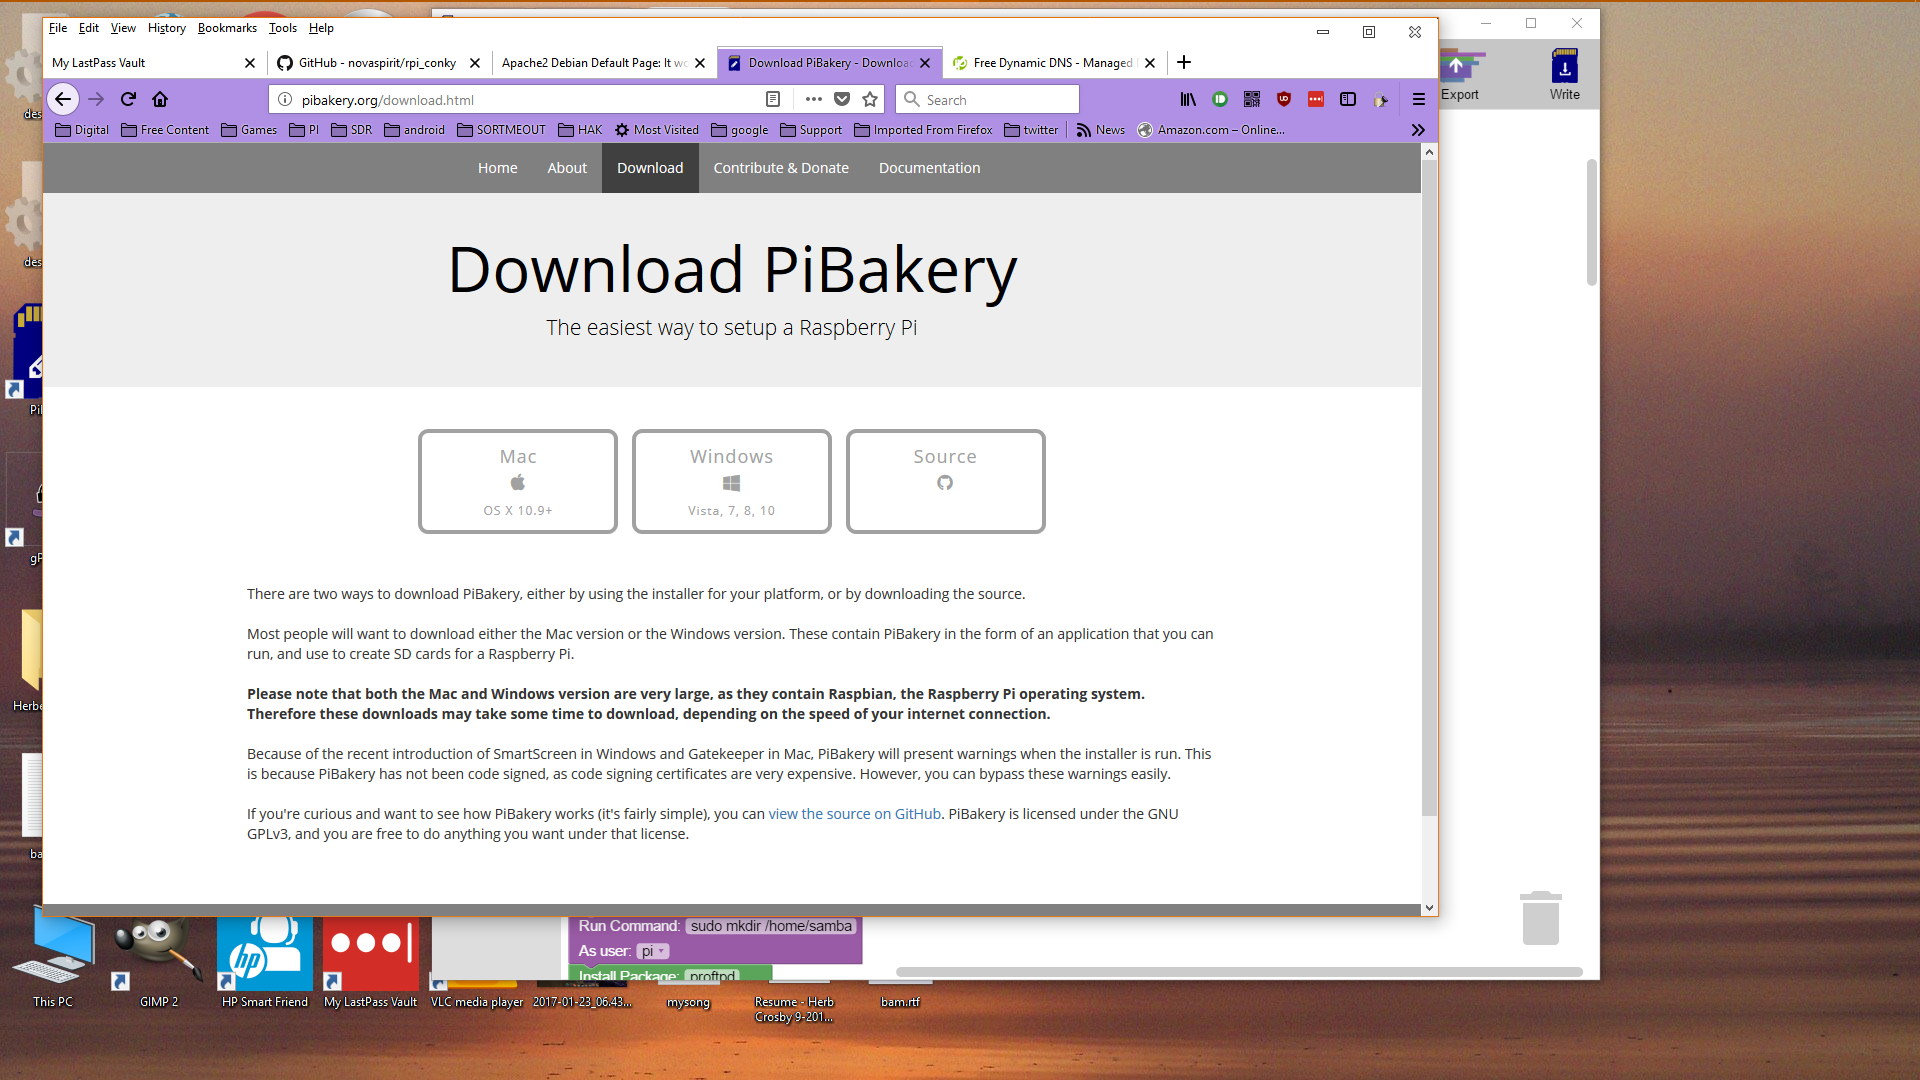 Image of PiBakery.org DownLoad page